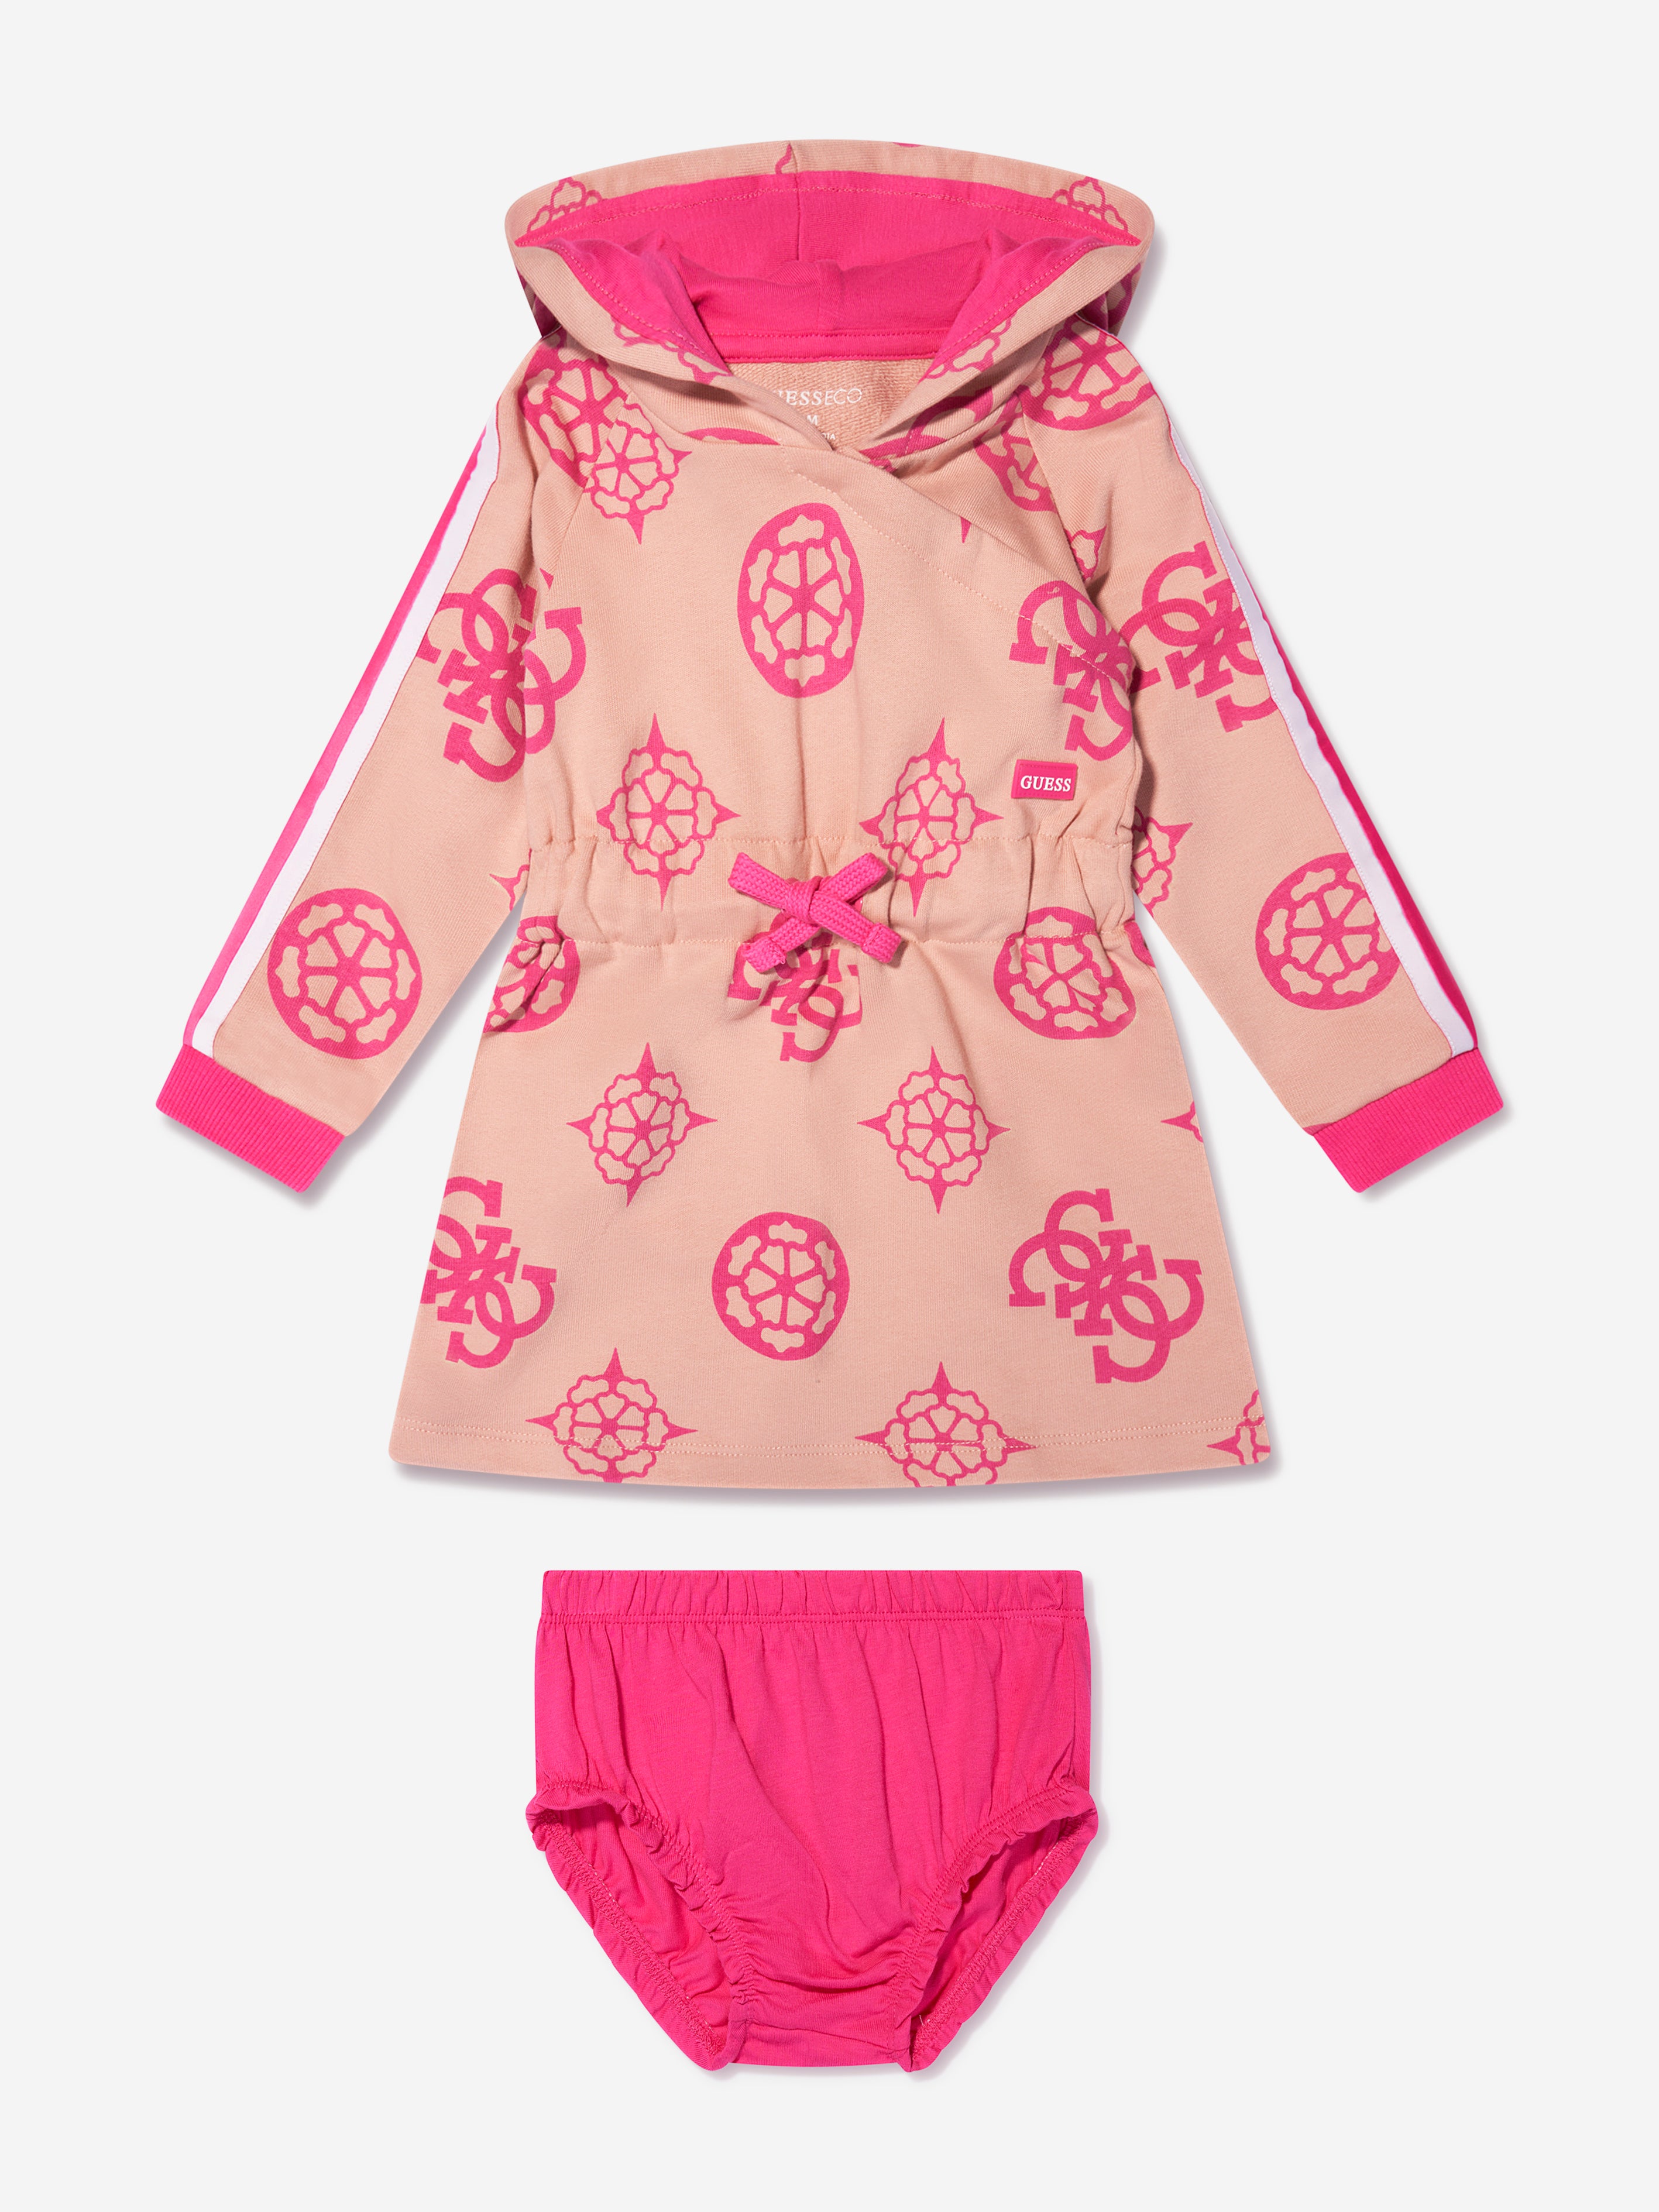 Zullen Atticus stem Guess Baby Girls Active Dress With Knickers in Pink | Childsplay Clothing